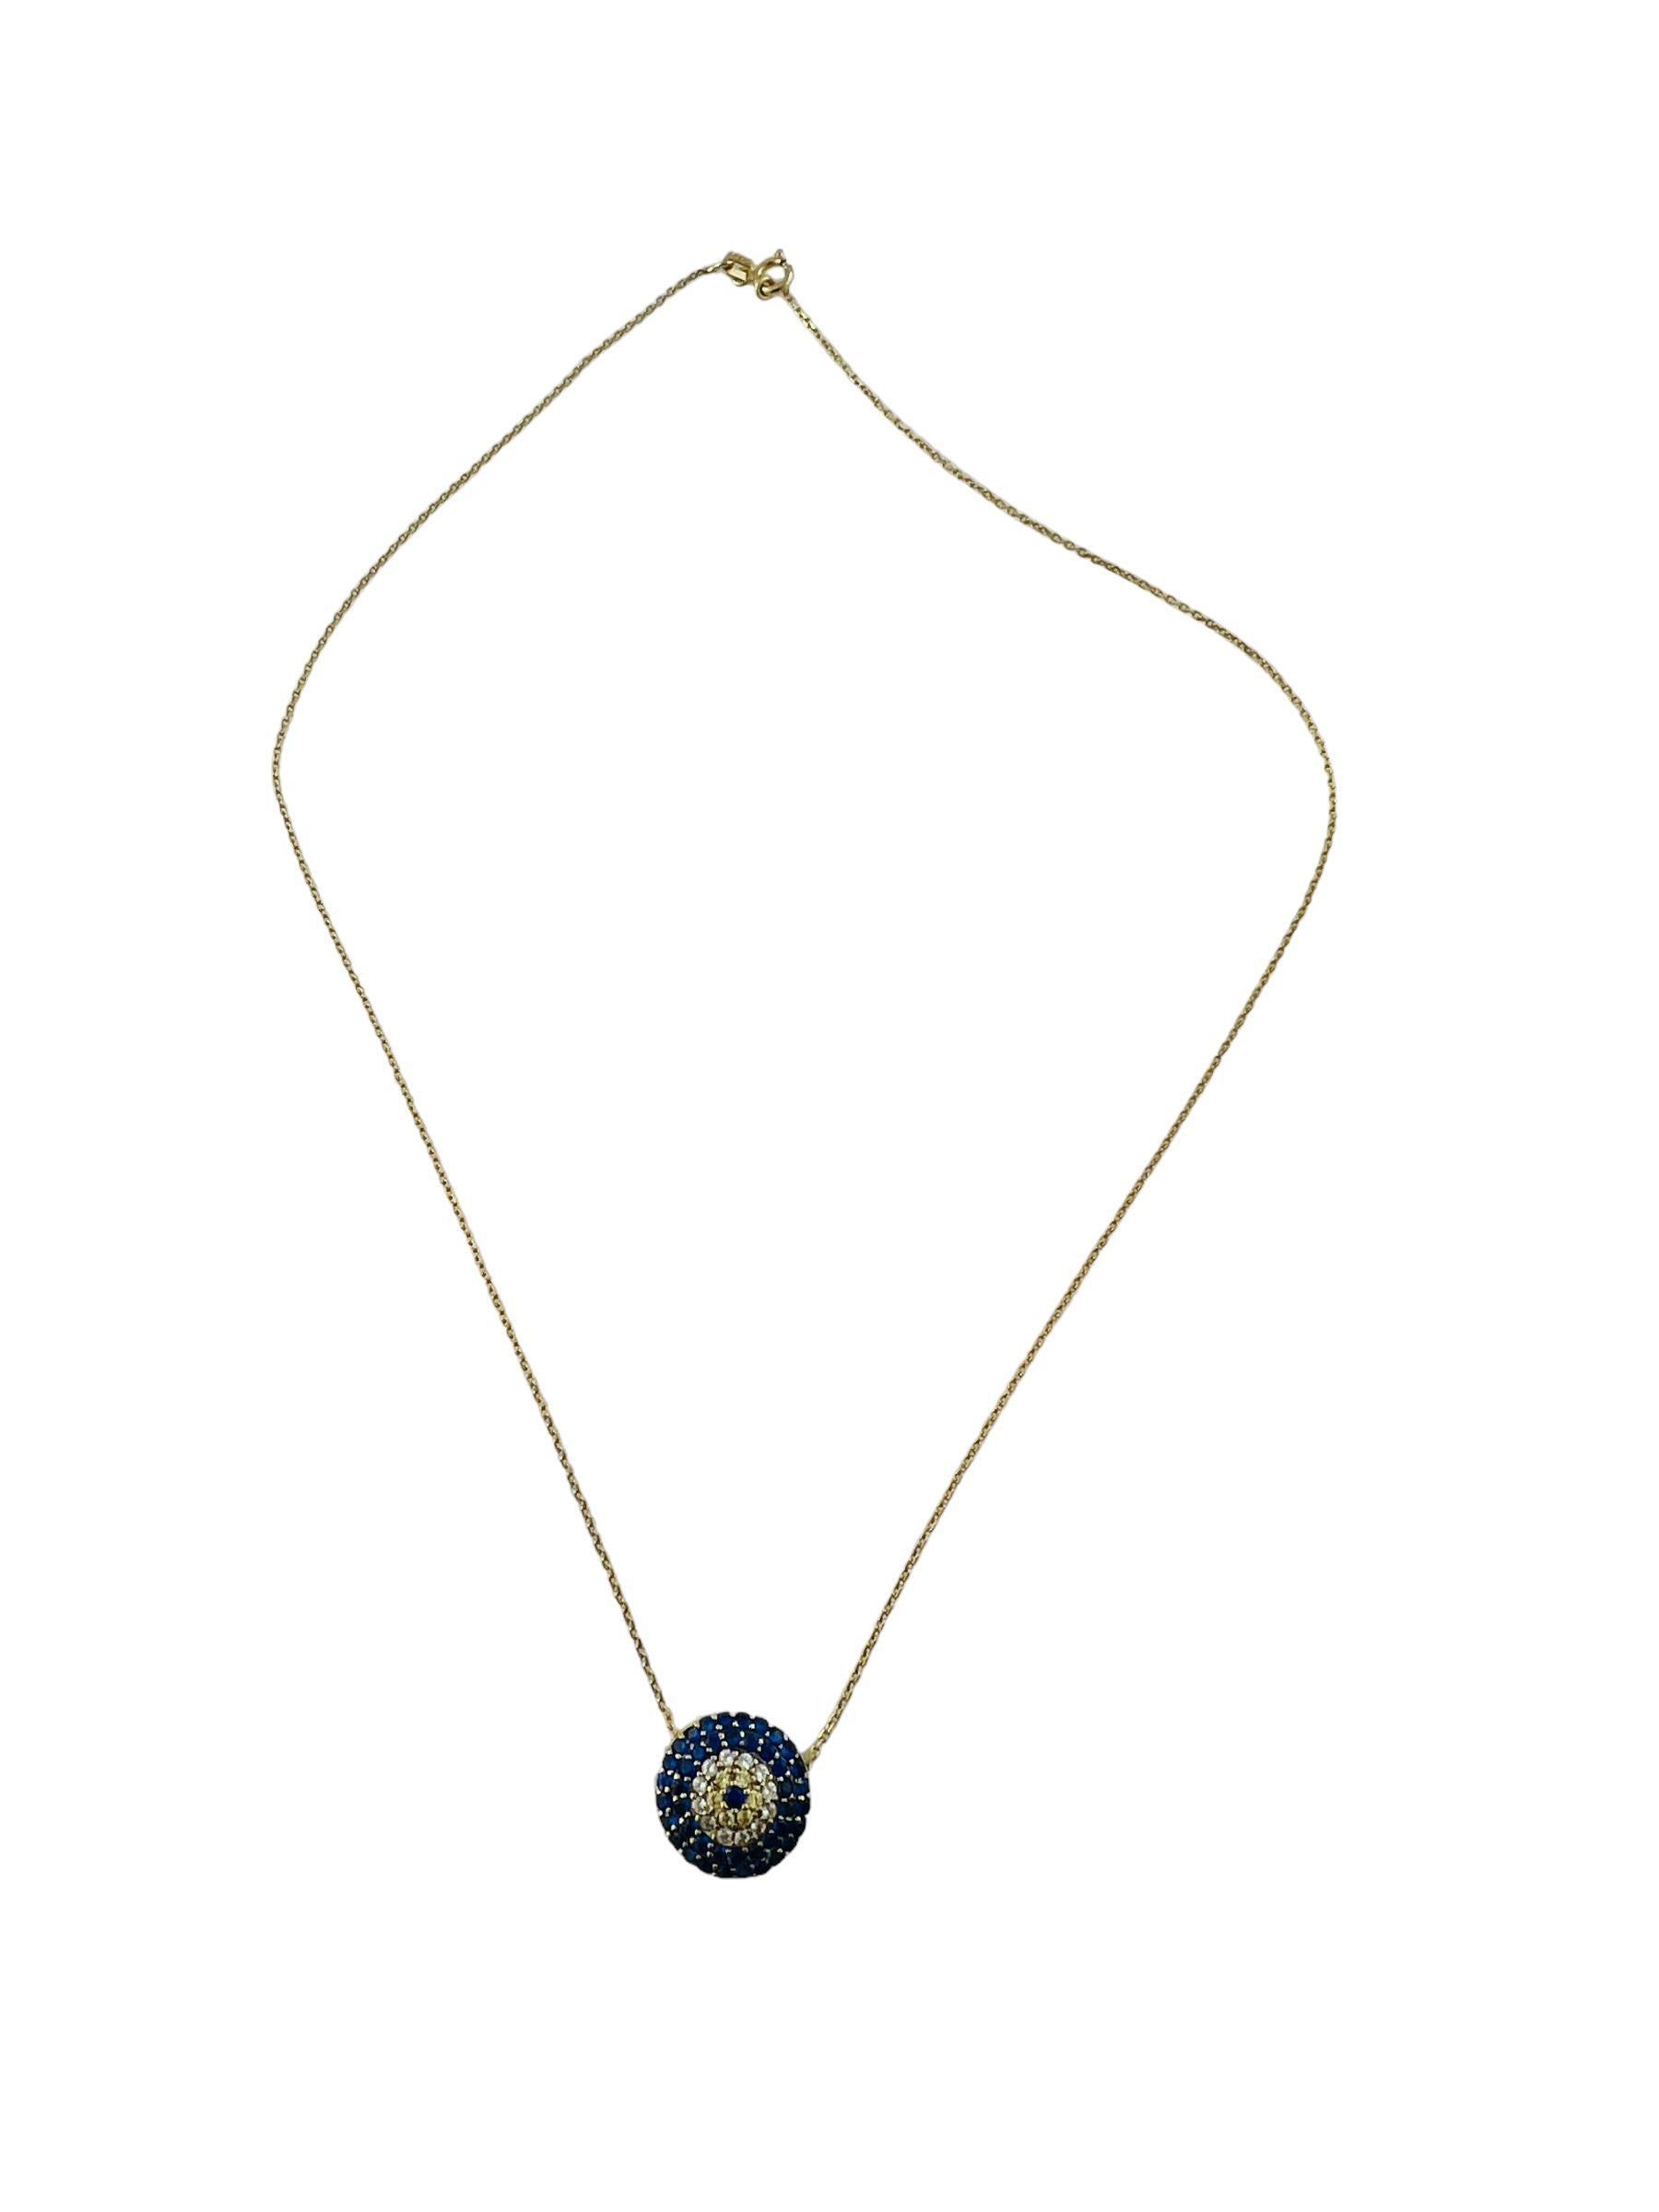 14K Yellow Gold Faceted Blue, Yellow and White Glass Stone Pendant Necklace

This beautiful necklace is set in 14K yellow gold.

Necklace is 17